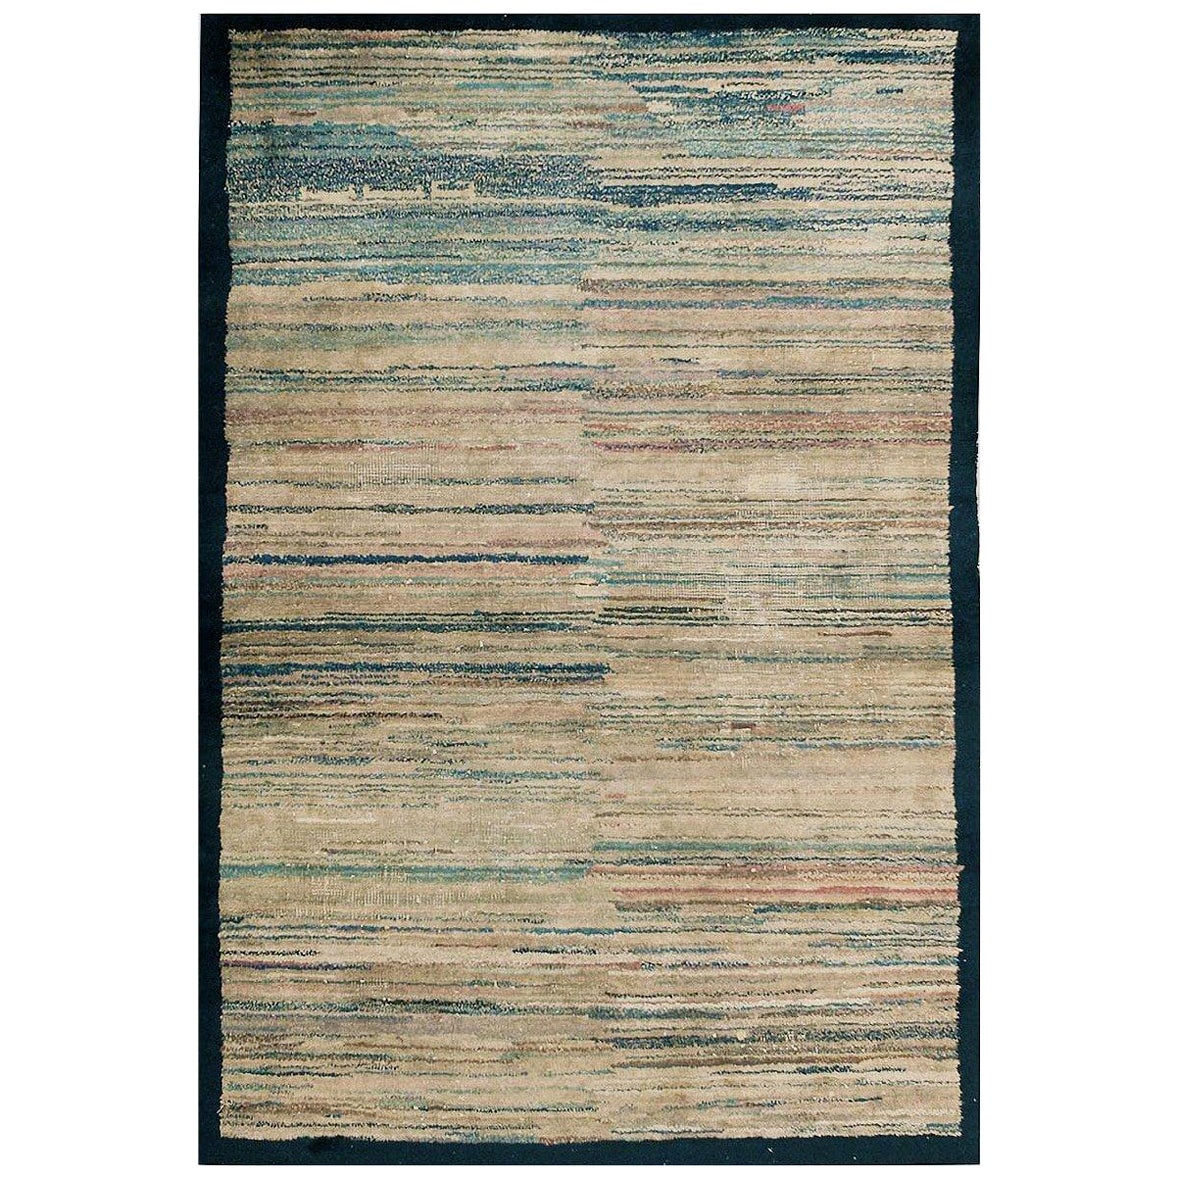 Tapis mongol ancien. Taille : 3 ft 9 in x 5 ft 7 in